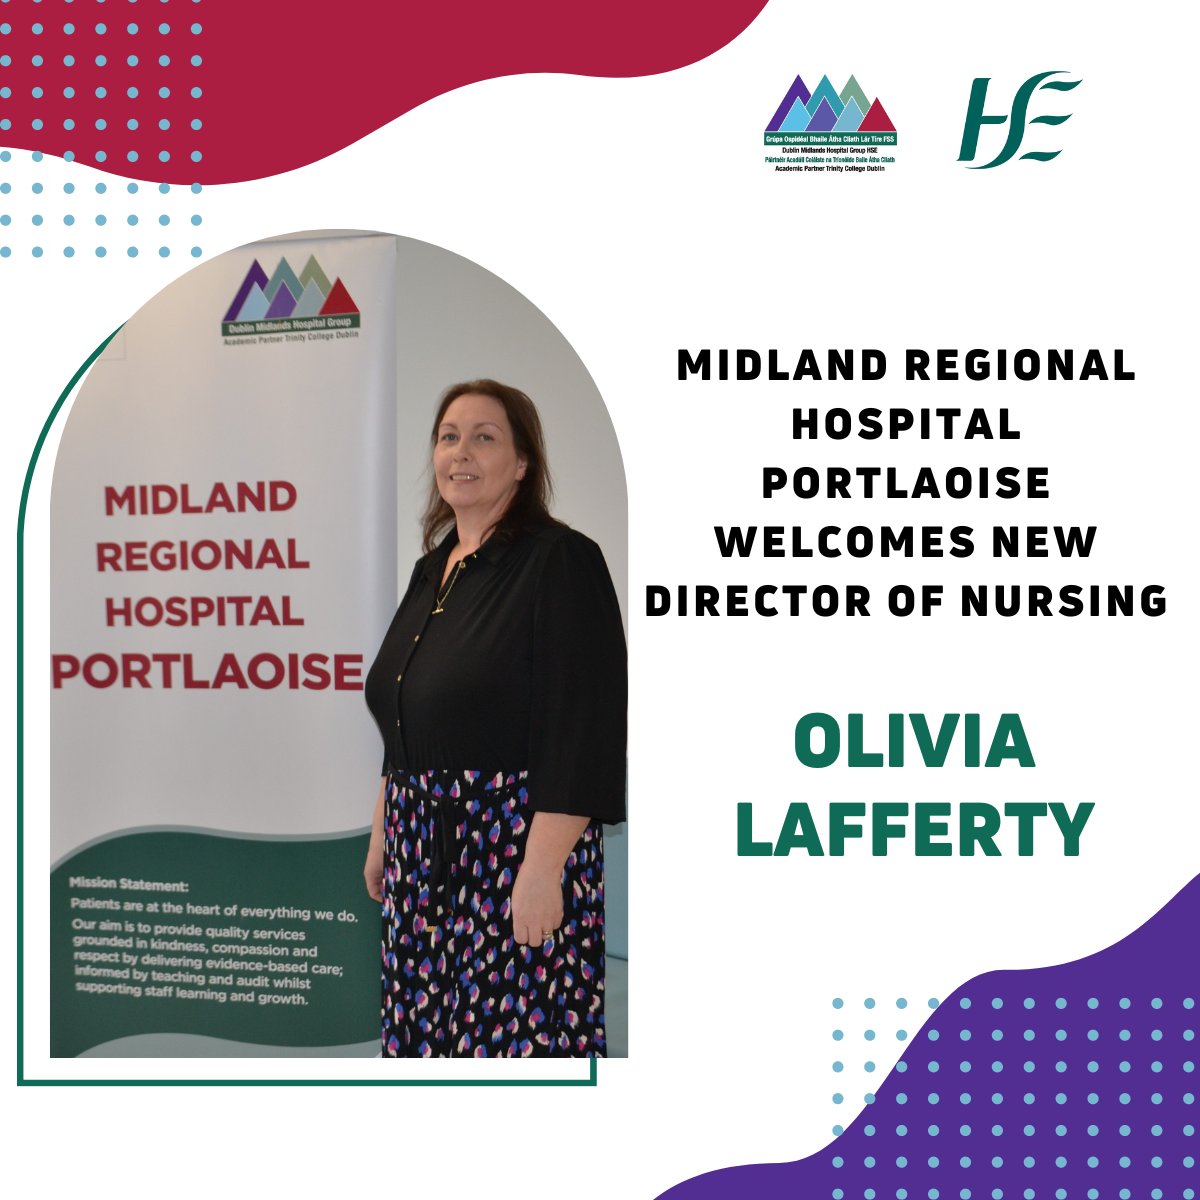 #MRHPortlaoise is pleased to announce the appointment of Ms. Olivia Lafferty as the new Interim Director of Nursing of the hospital. Olivia takes up the post with over 20 years of experience in hospital and community services. For more info: bit.ly/3nCVhJ9